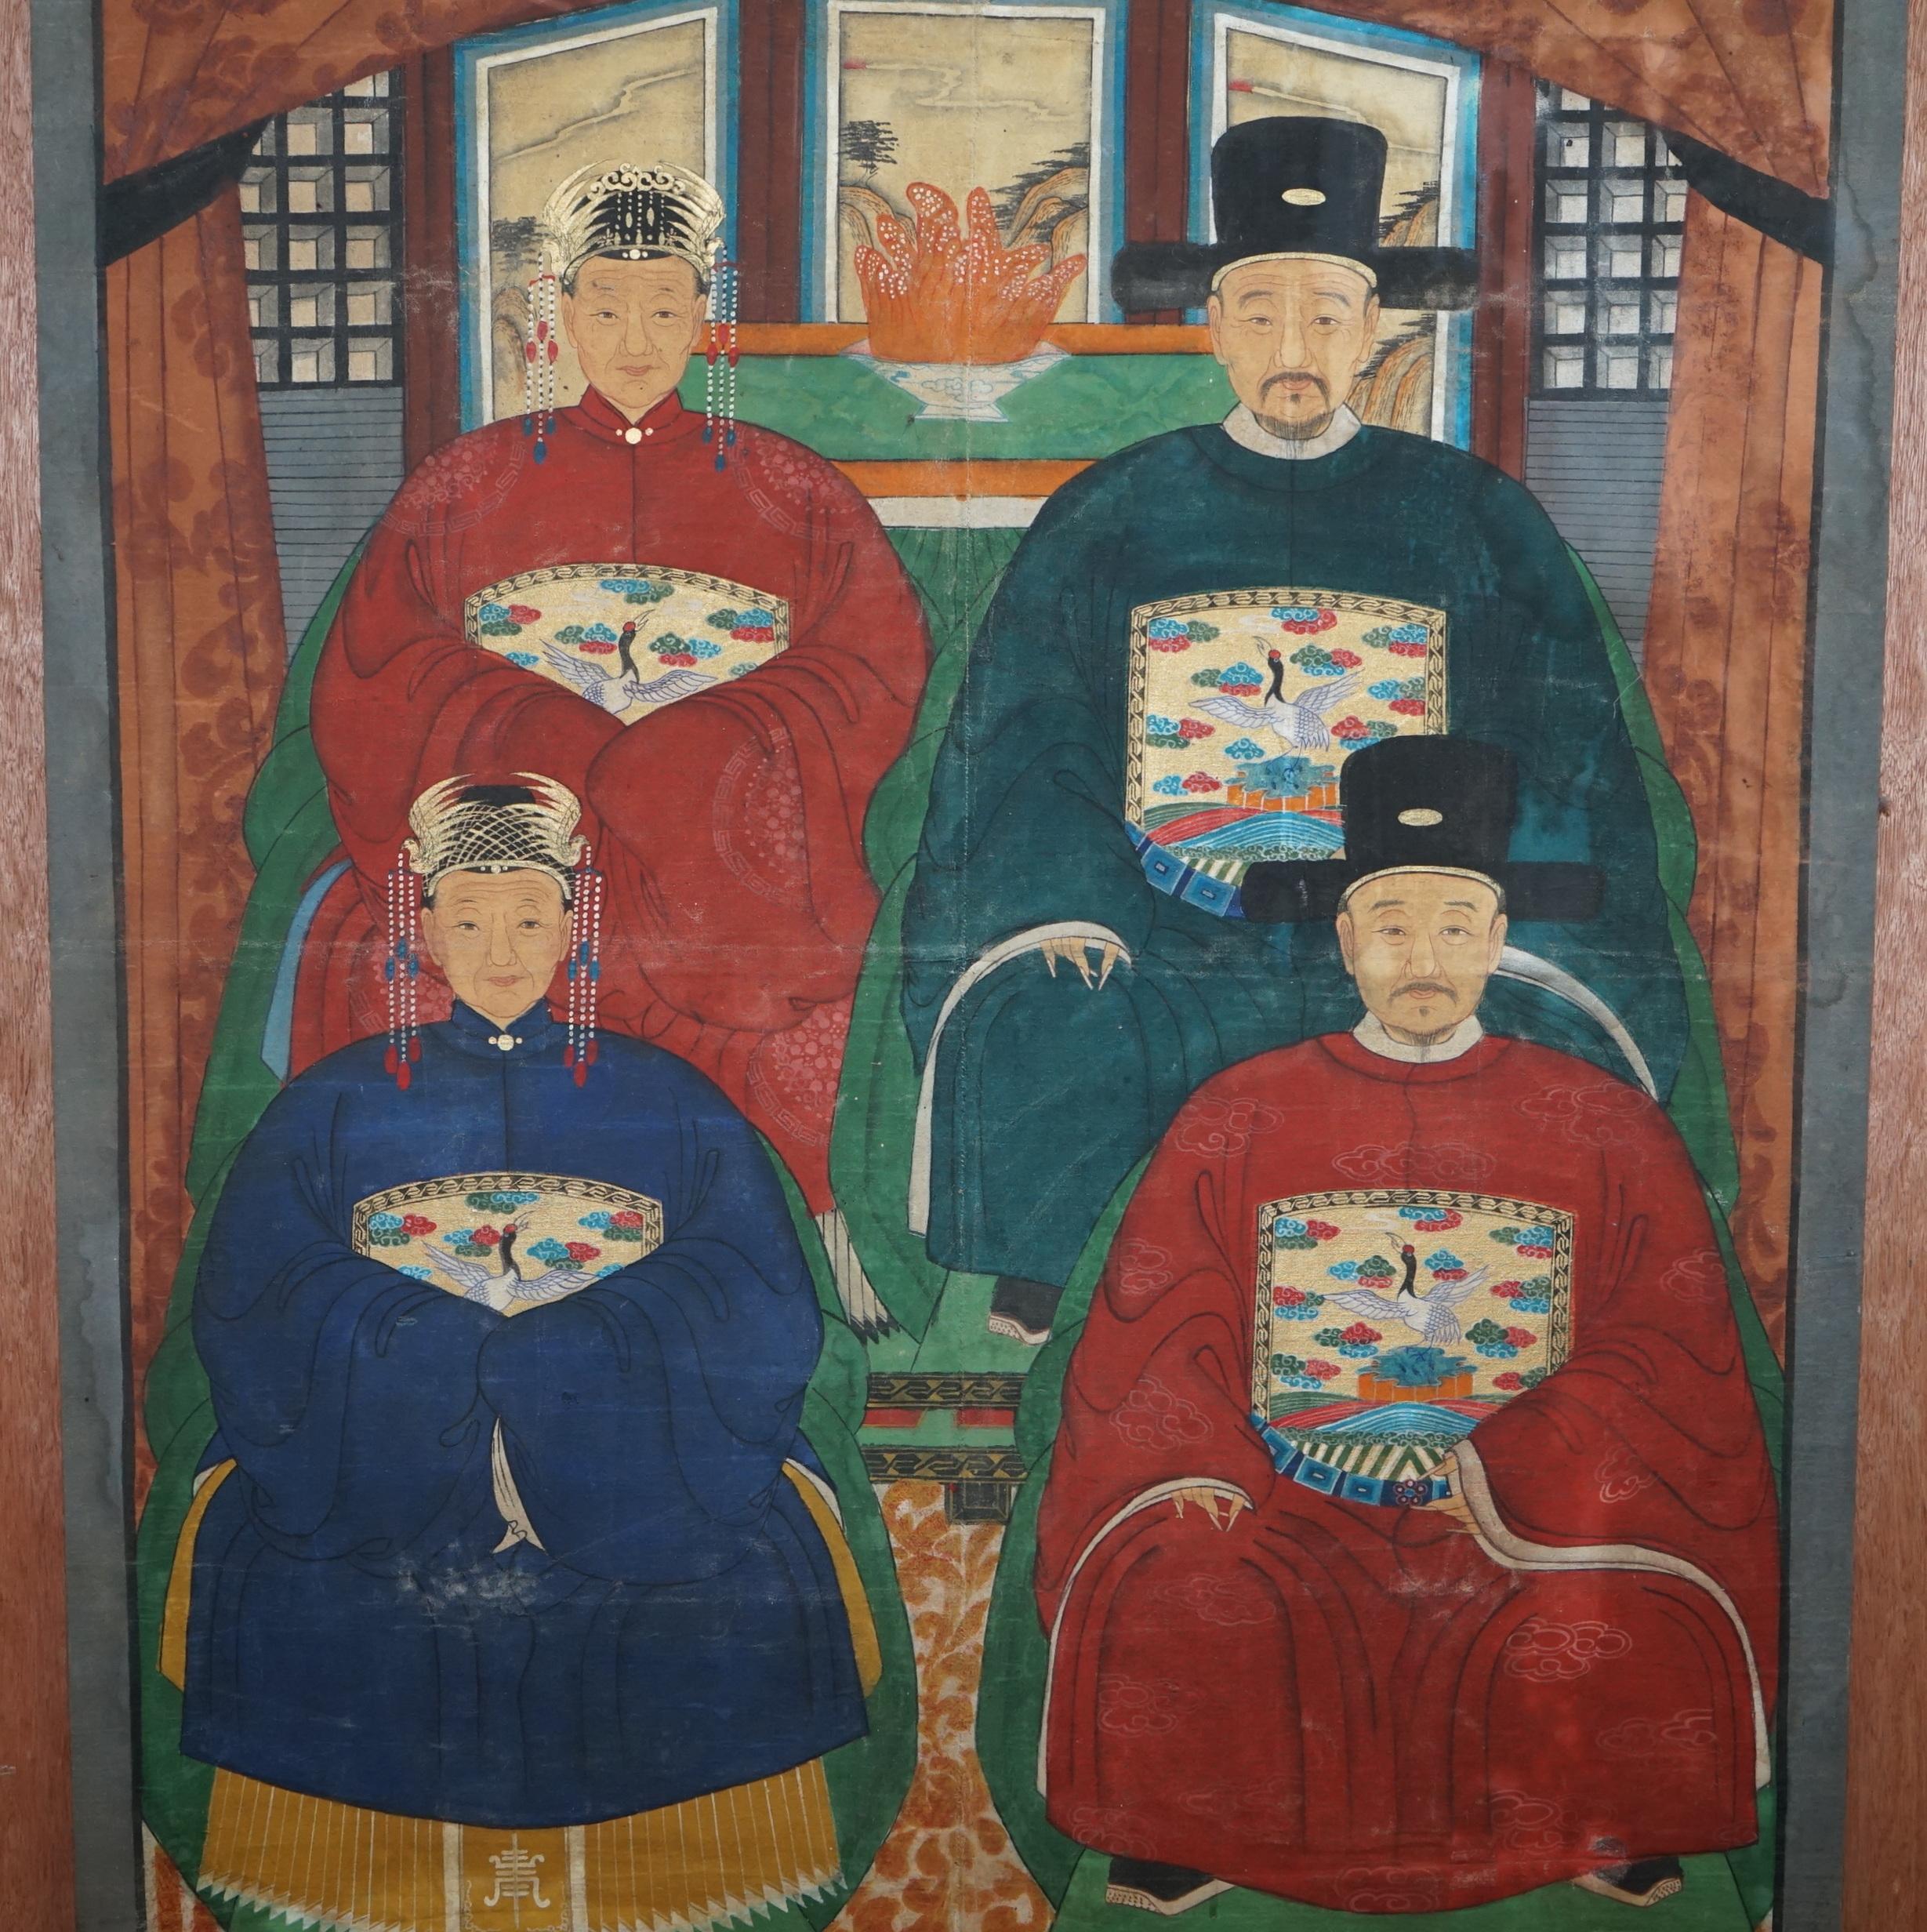 Qing Rare circa 1880 Chinese Ancestral Portrait Painting Oil on Canvas Part of Suite